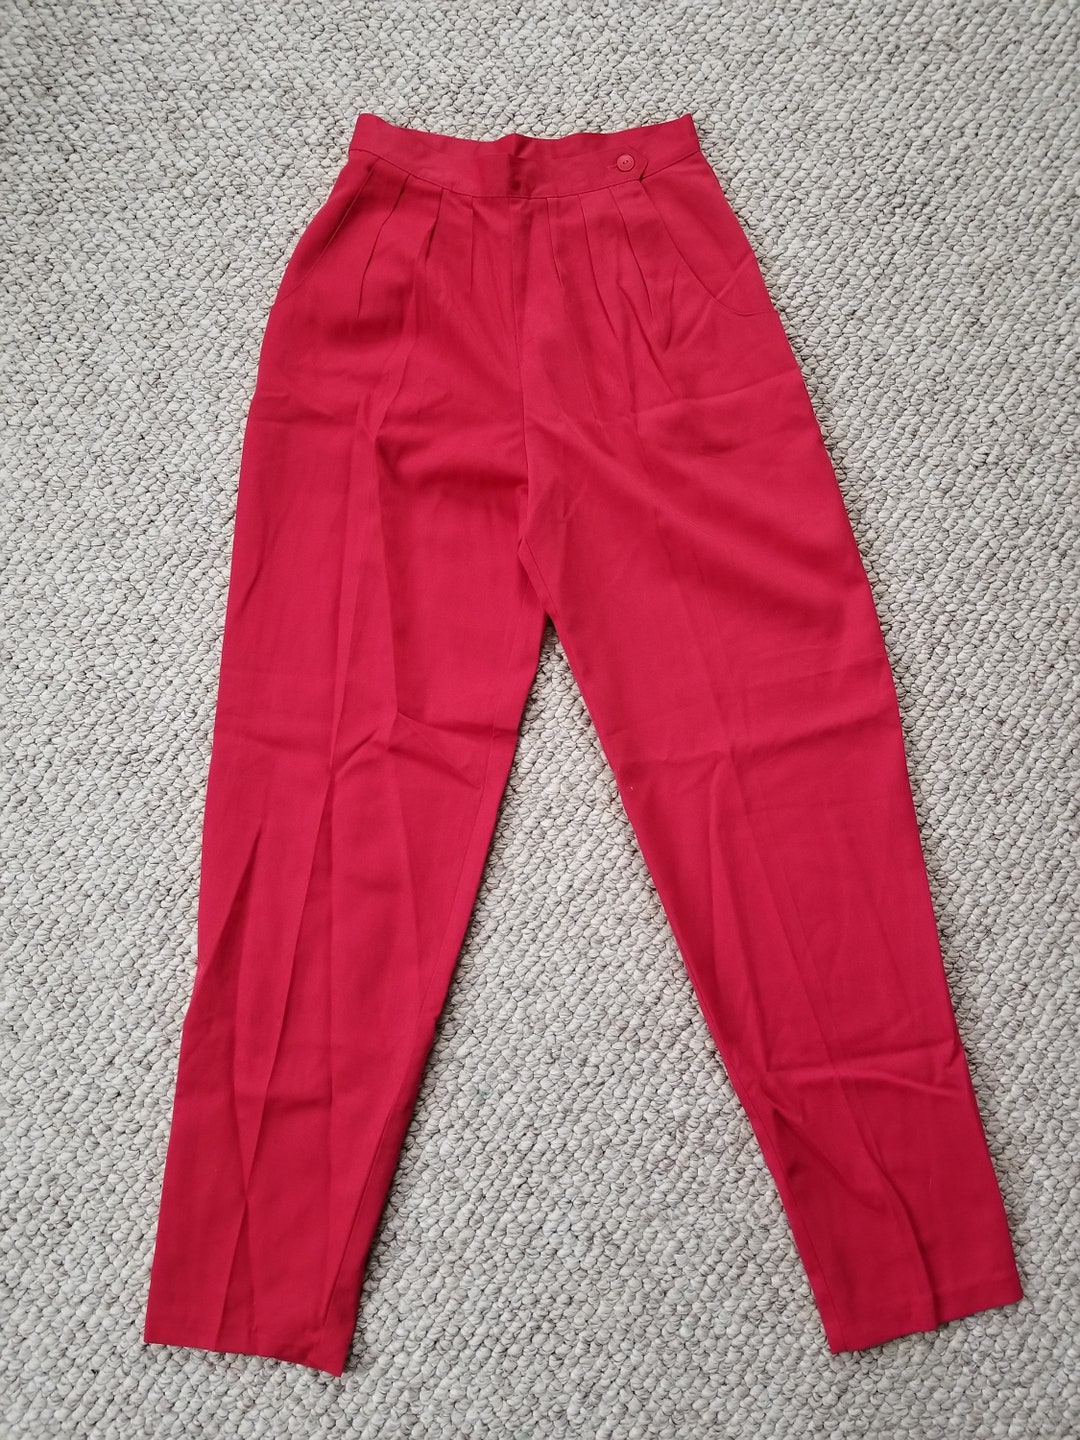 NEW 80s Red Ladies Pants 6 12 or 14 Casablanca High Rise - Etsy